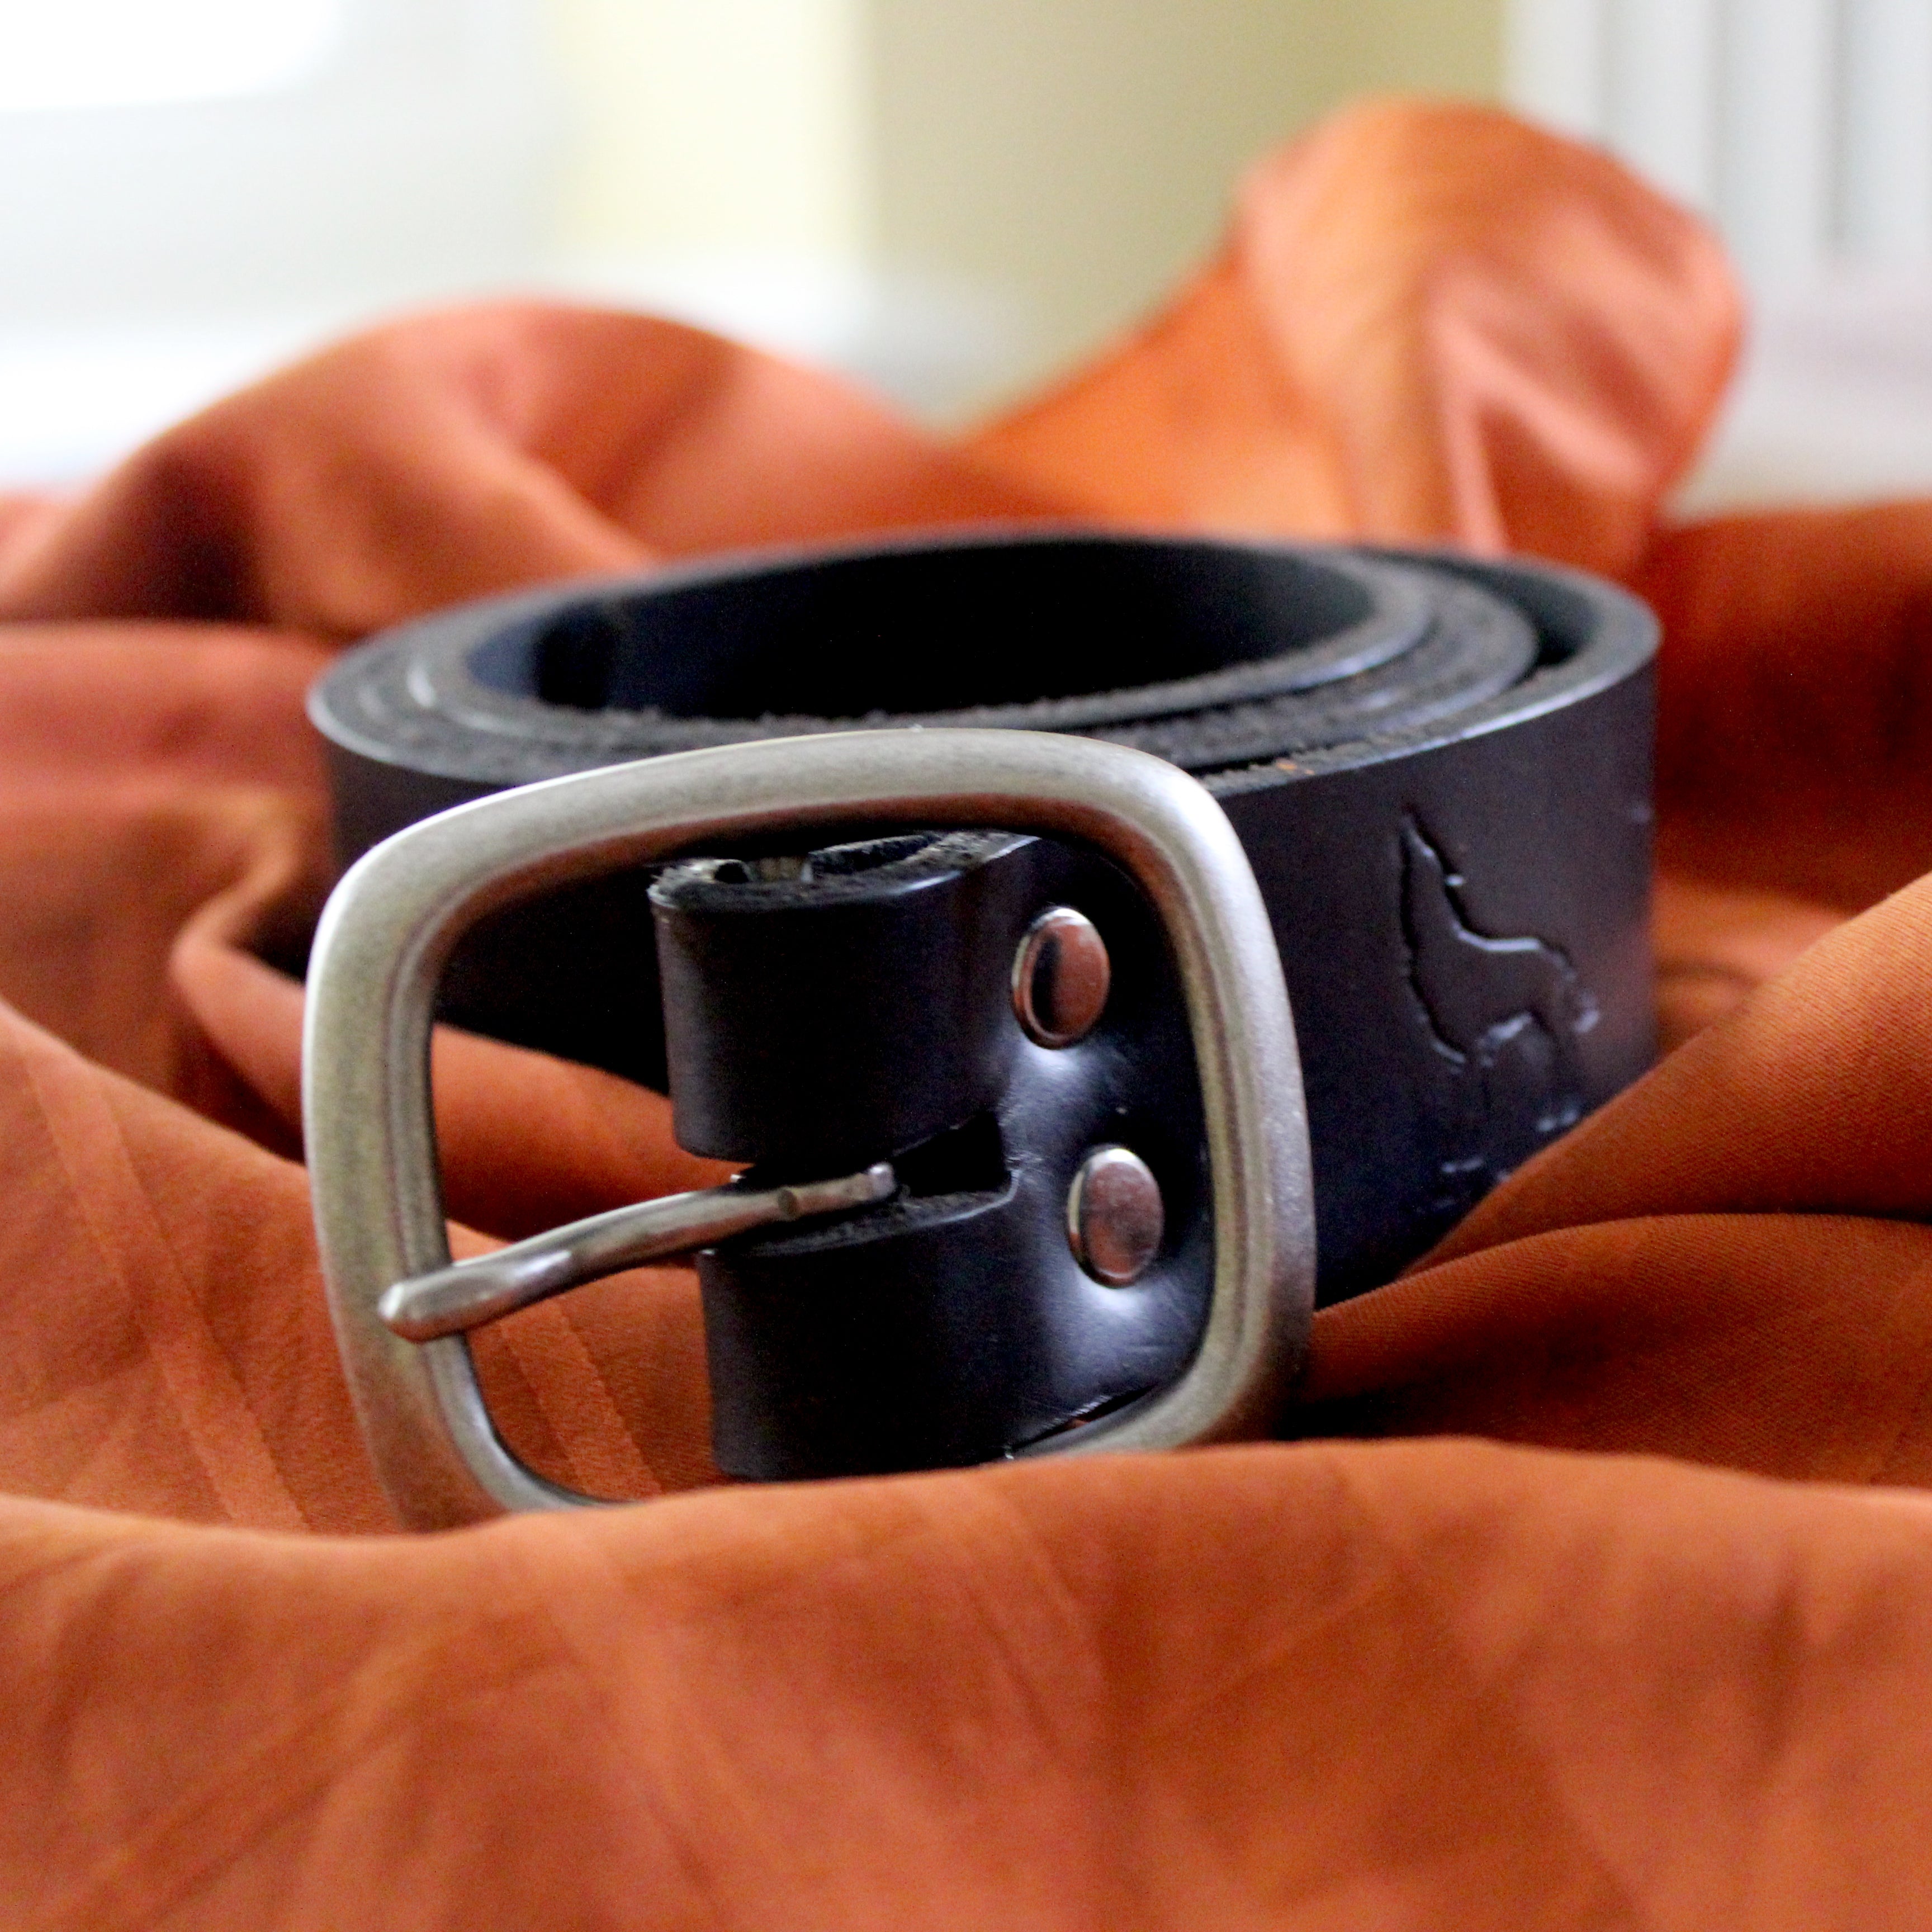 Black, Brown and Light Brown Leather Belts Wolf River Leather